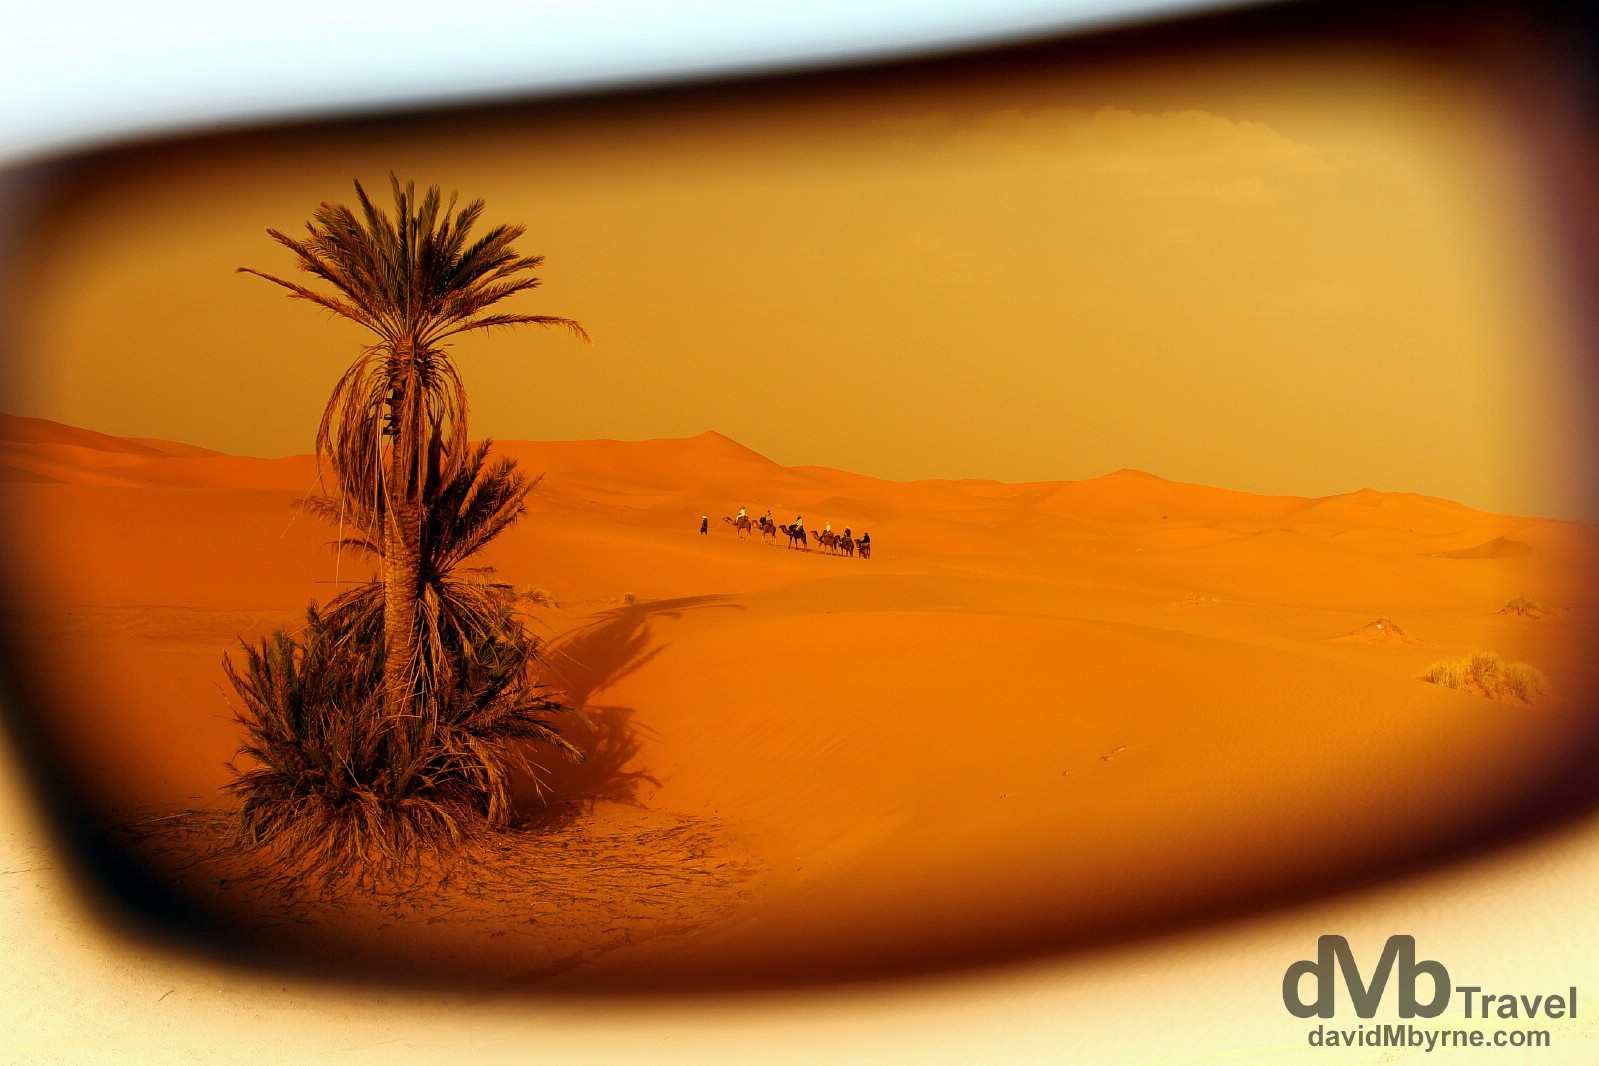 As seen through sunglasses, a camel train on the Erg Chebbi sand dunes near the village of Merzouga, Morocco. May 19th, 2014. 